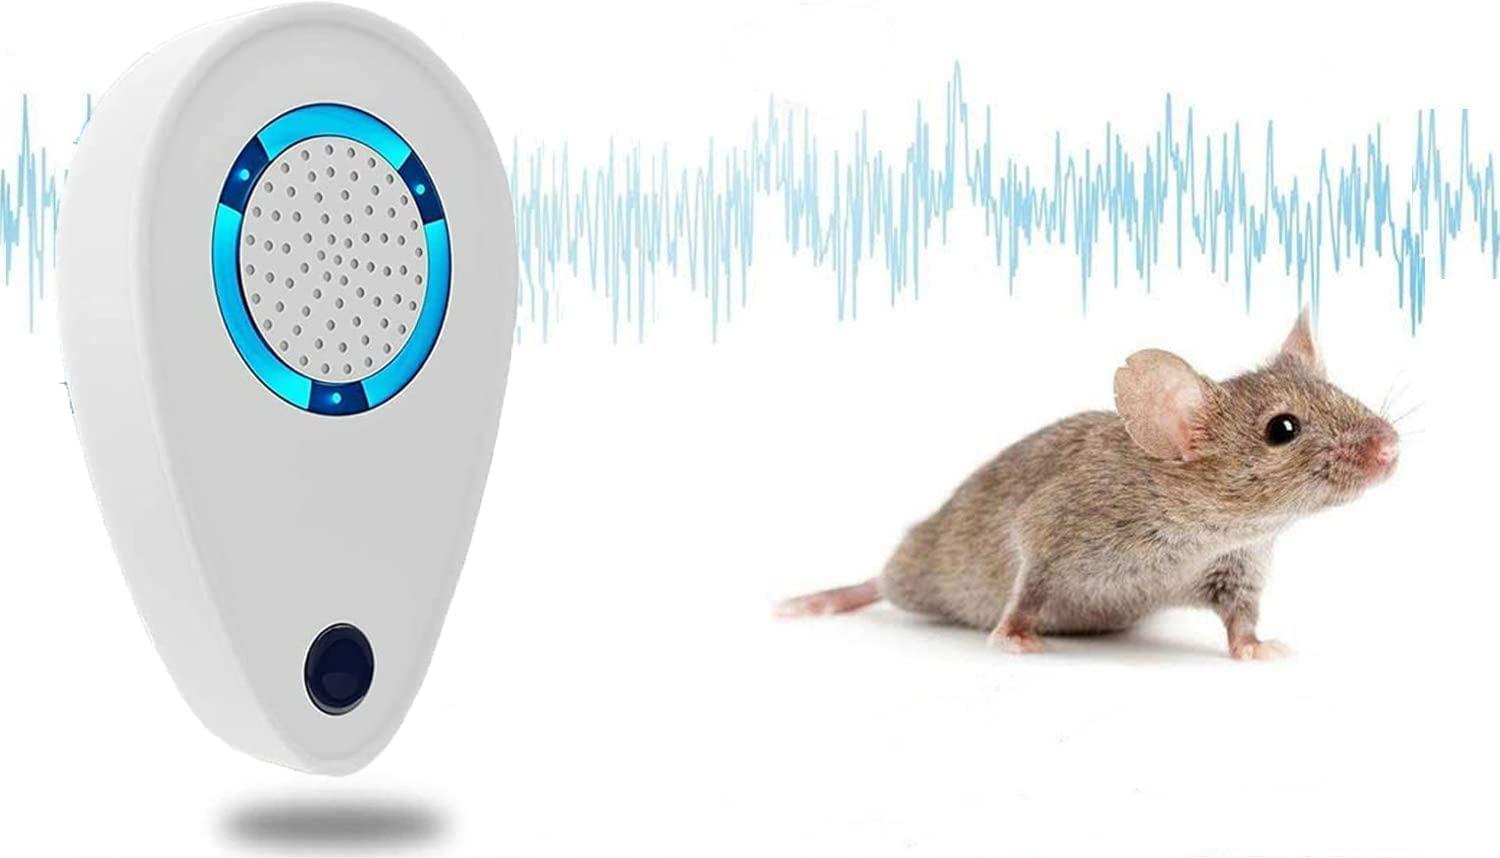 Do Ultrasonic Pest Repellers Work on Mice? Yes of Course!